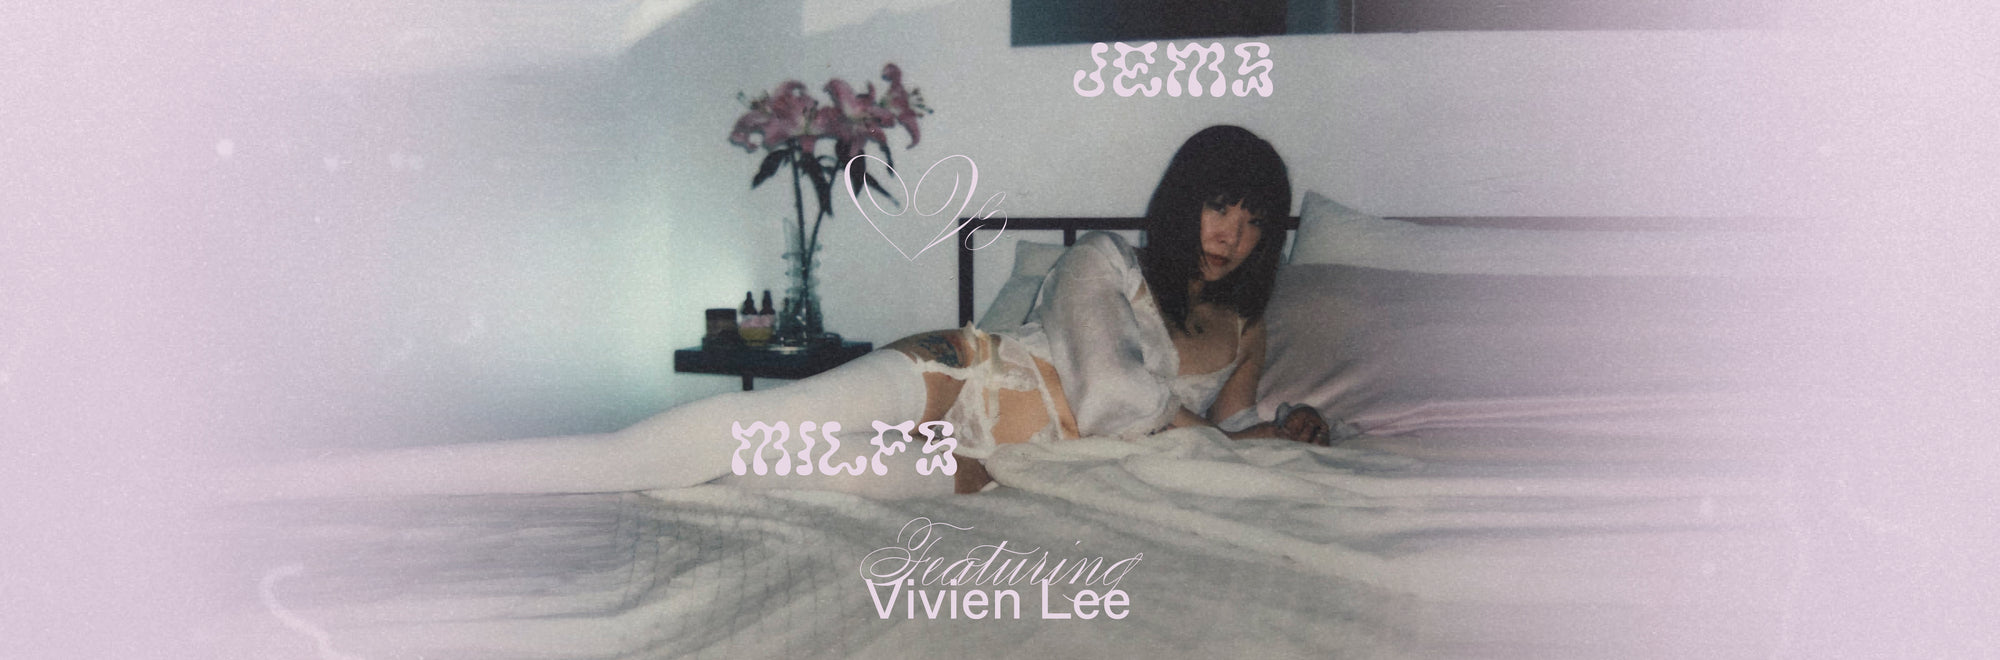 Vivien Lee lounging in bed wearing white lingerie